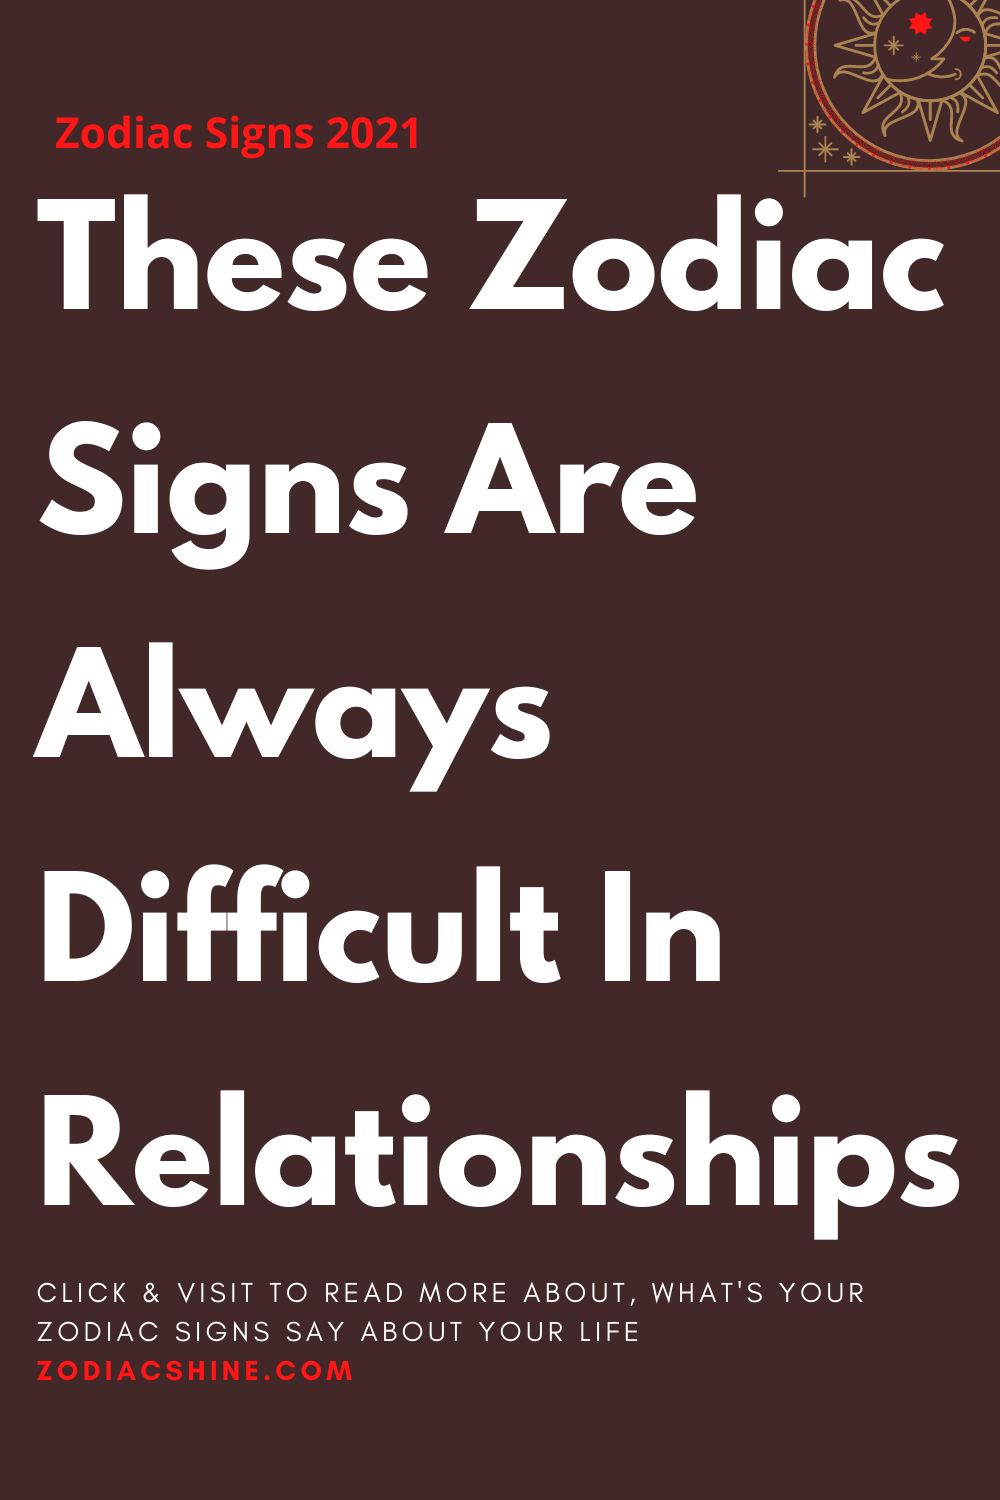 These Zodiac Signs Are Always Difficult In Relationships